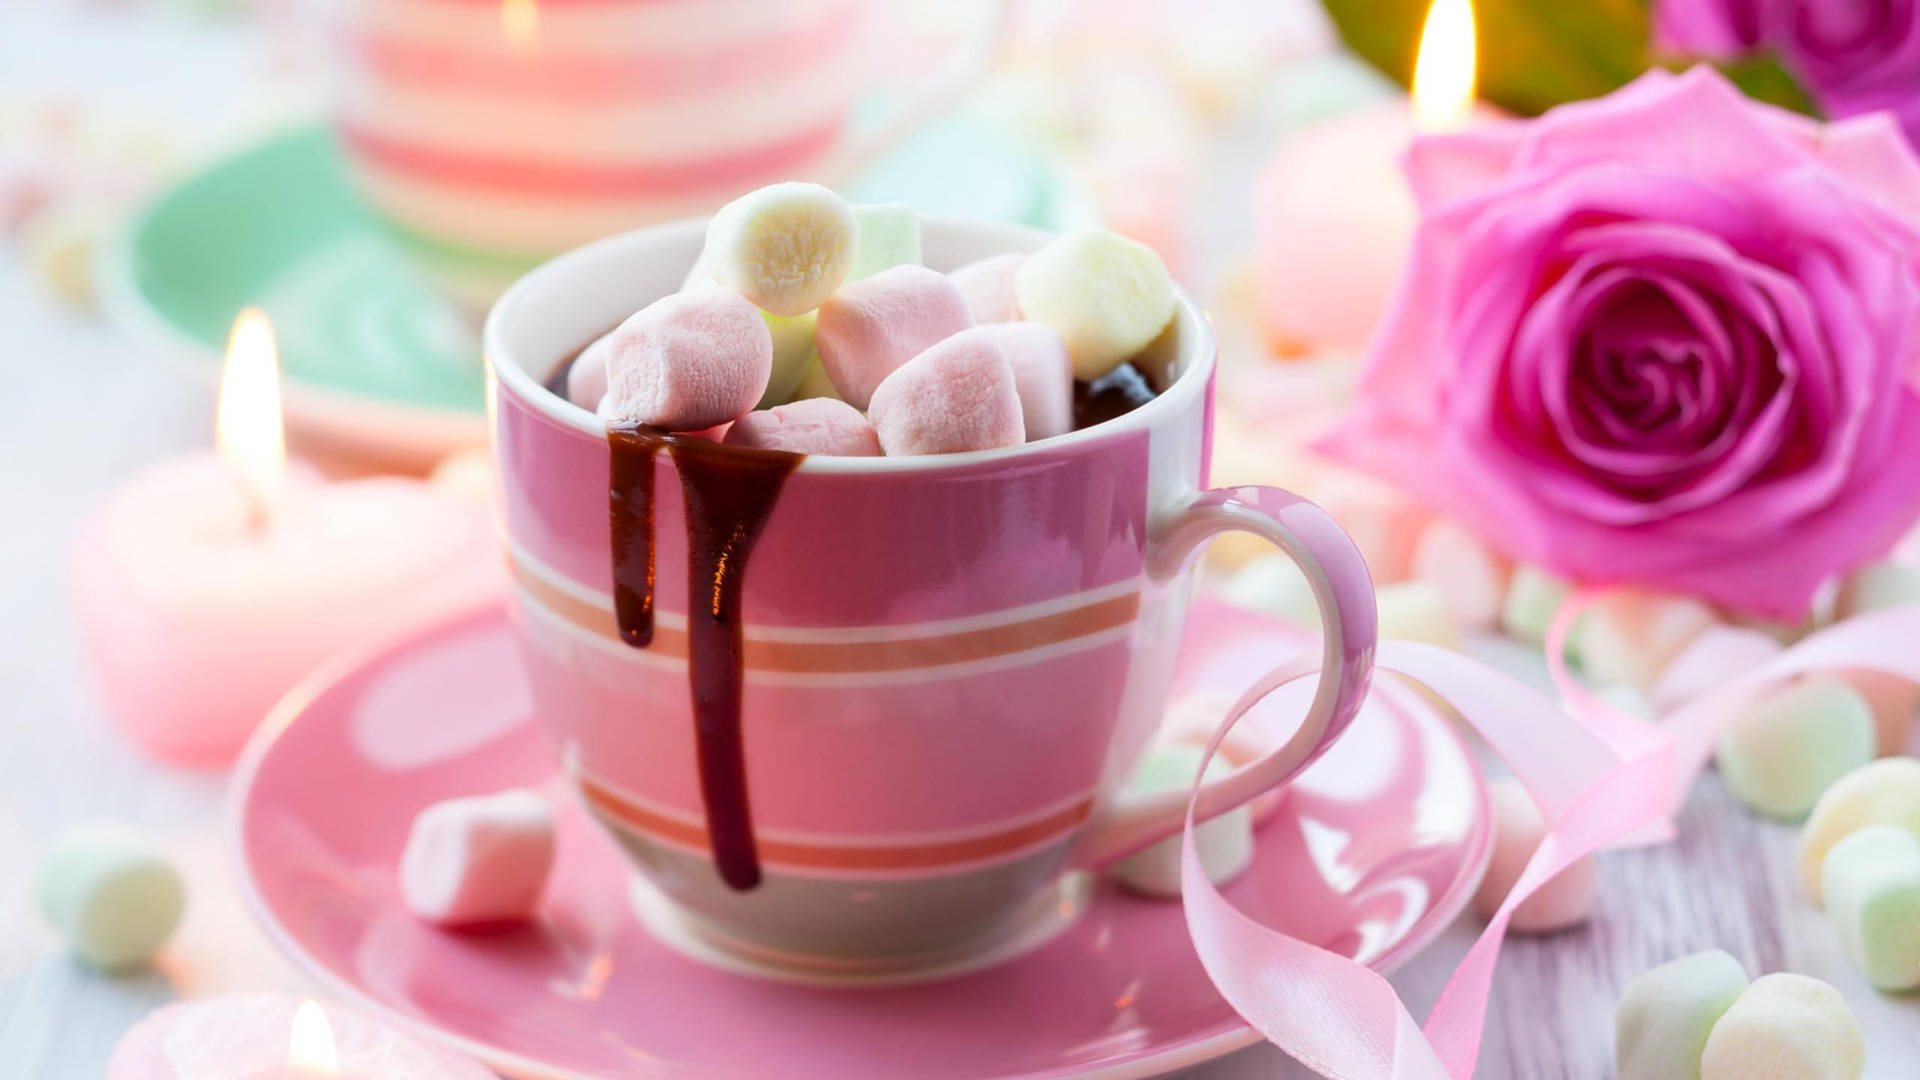 Free 3d Marshmallow Wallpaper Downloads, [100+] 3d Marshmallow Wallpapers  for FREE 